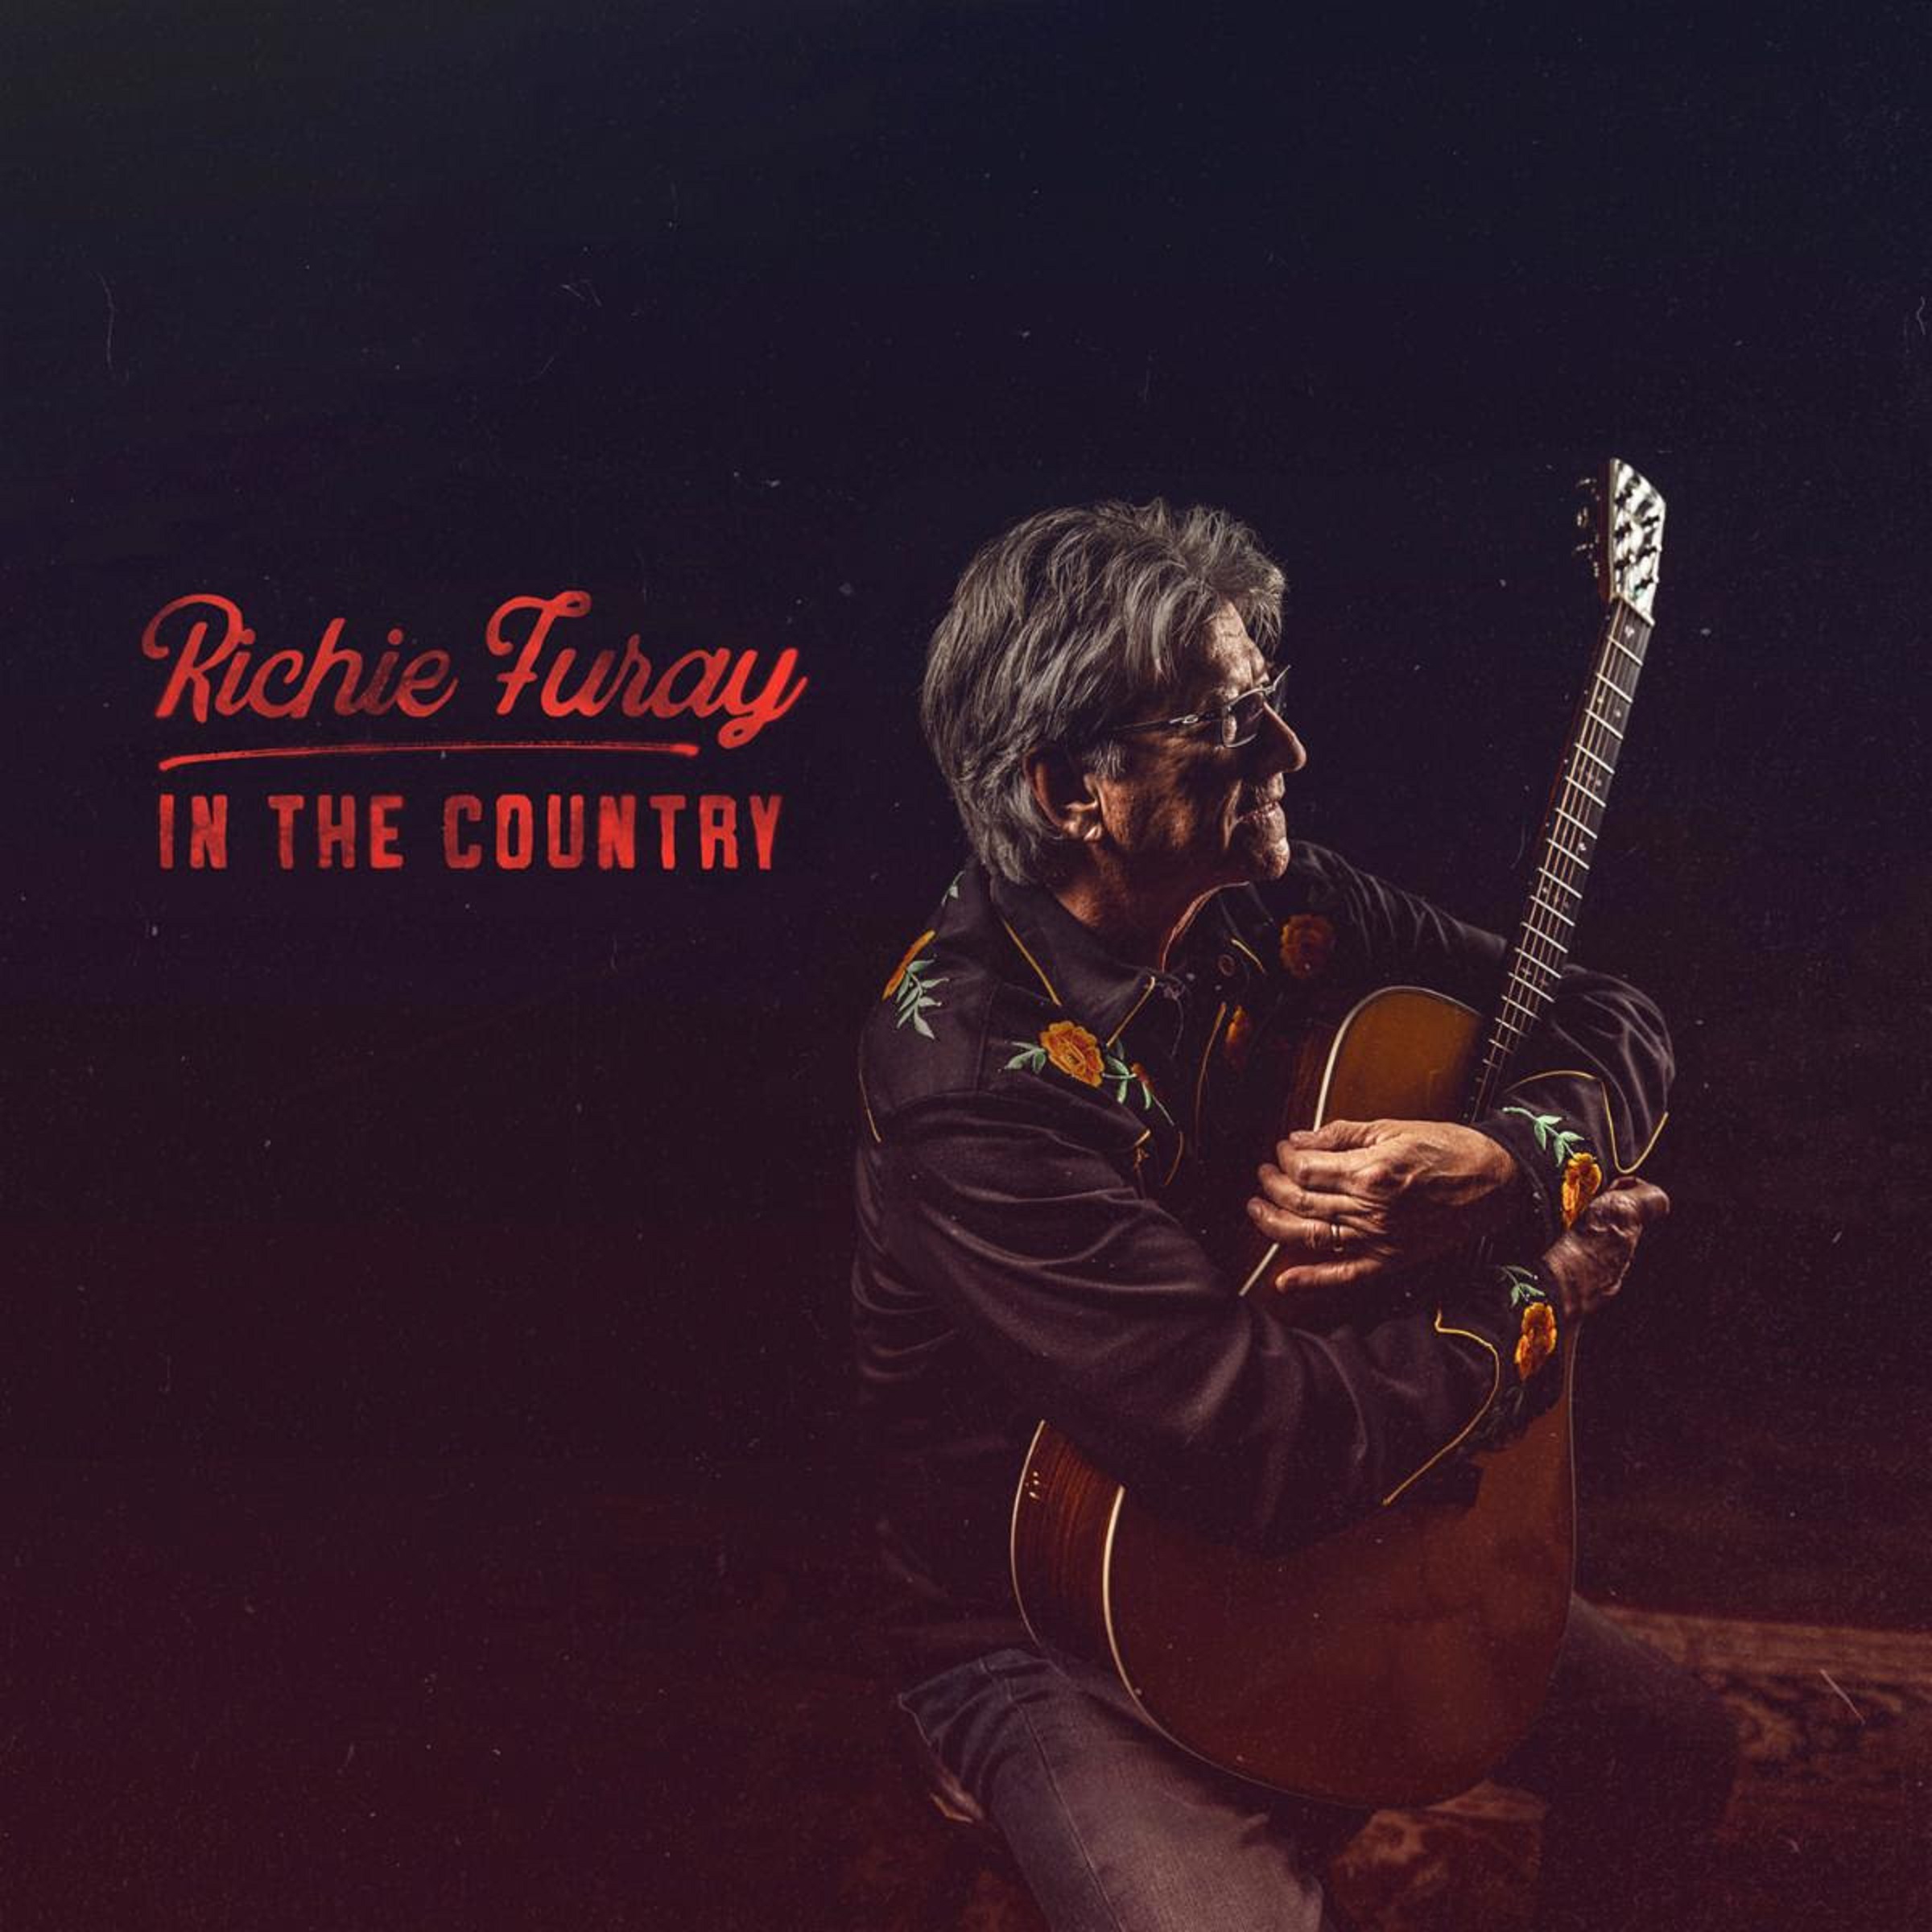 Richie Furay Announces New Studio Album 'In The Country' on July 8 - Shares new video "Somebody Like You"